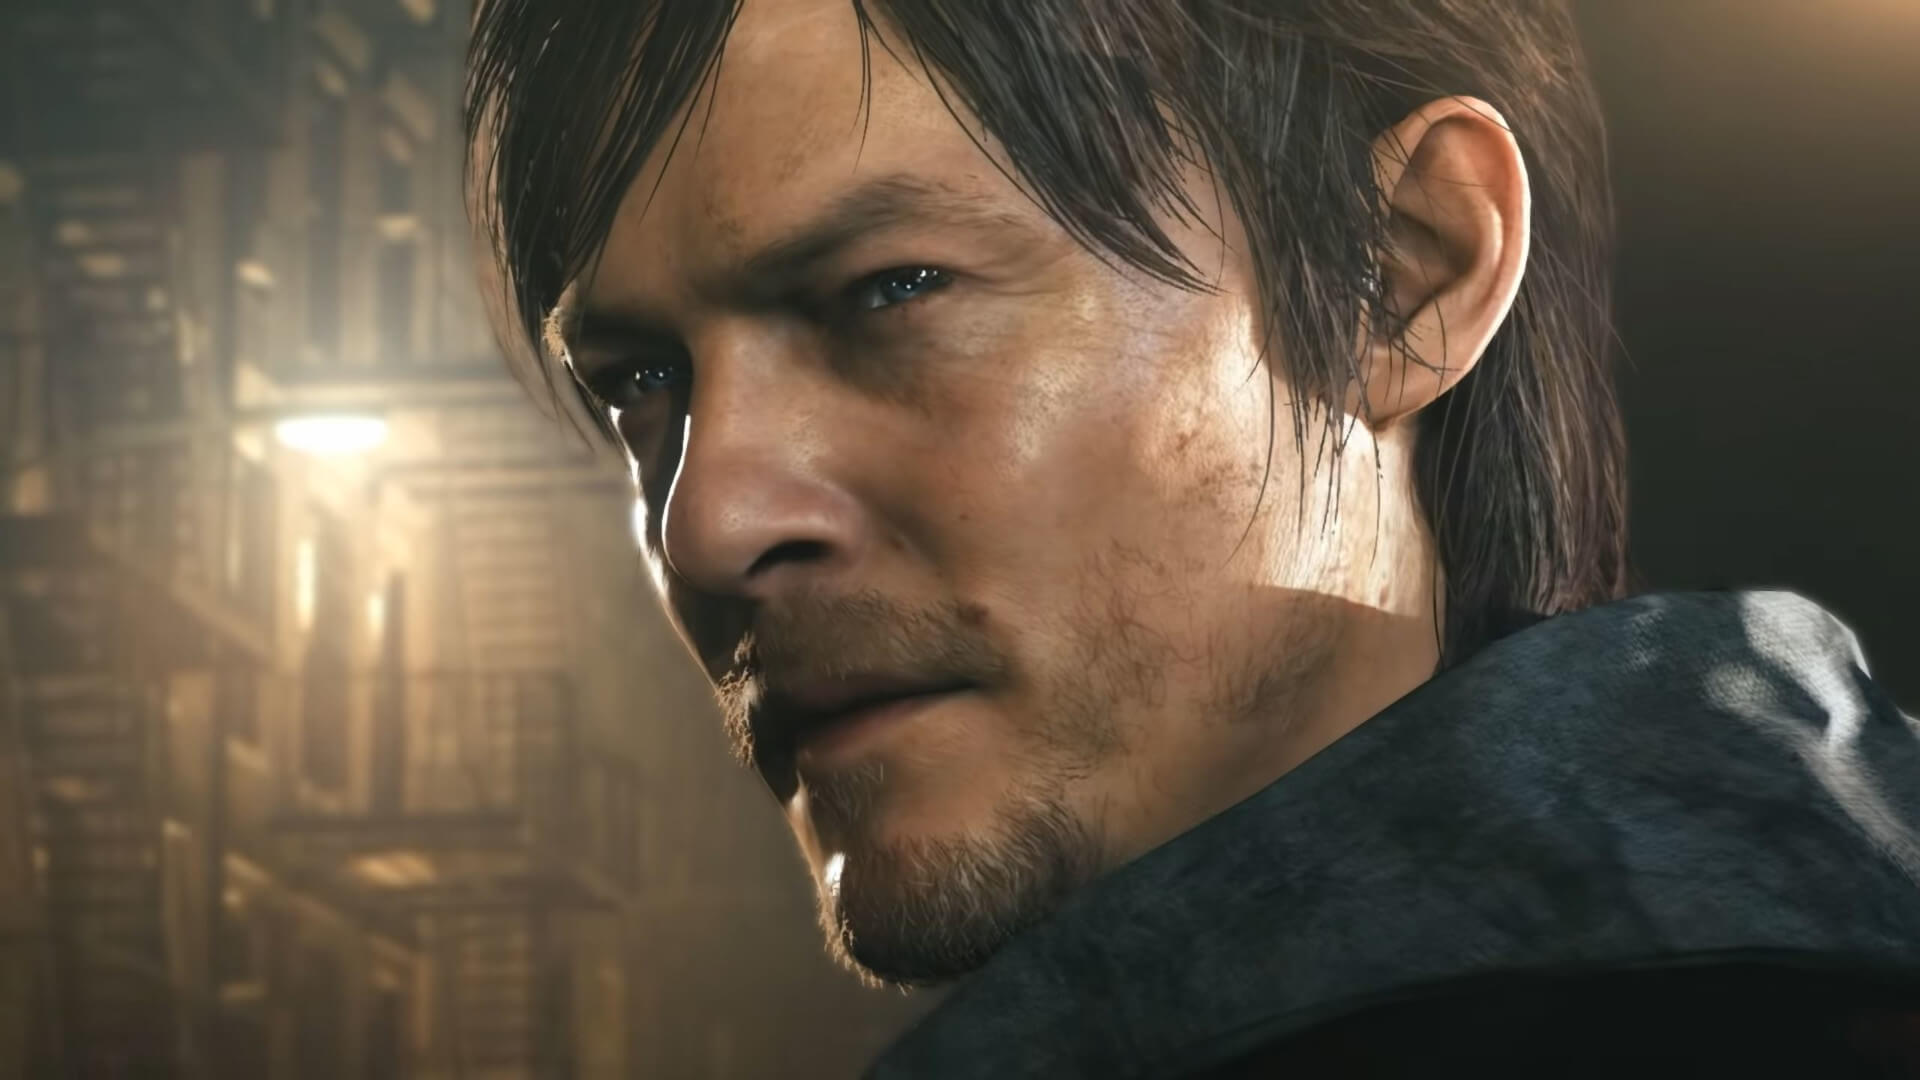 Norman Reedus in the now-canceled Silent Hill game P.T., or Silent Hills as it would otherwise have been known